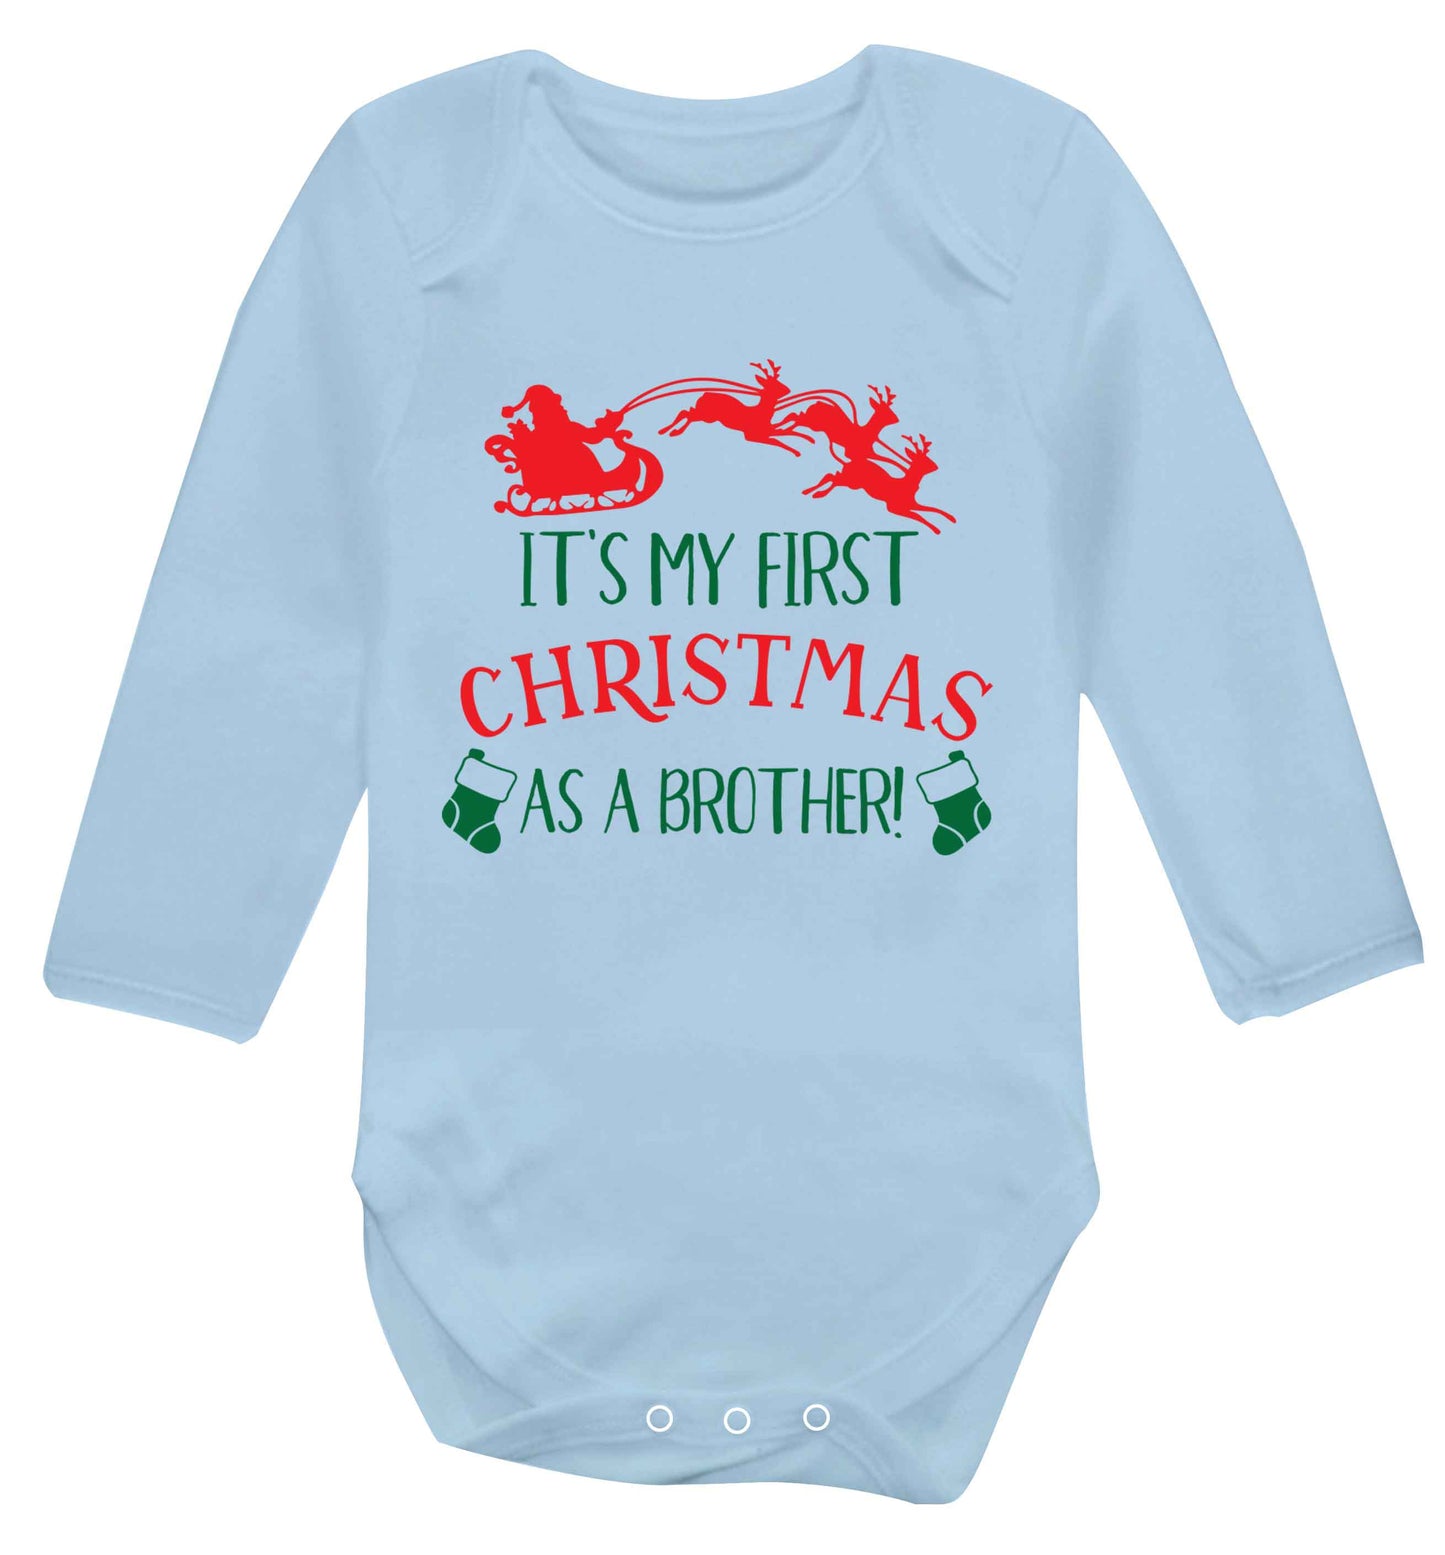 It's my first Christmas as a brother! Baby Vest long sleeved pale blue 6-12 months